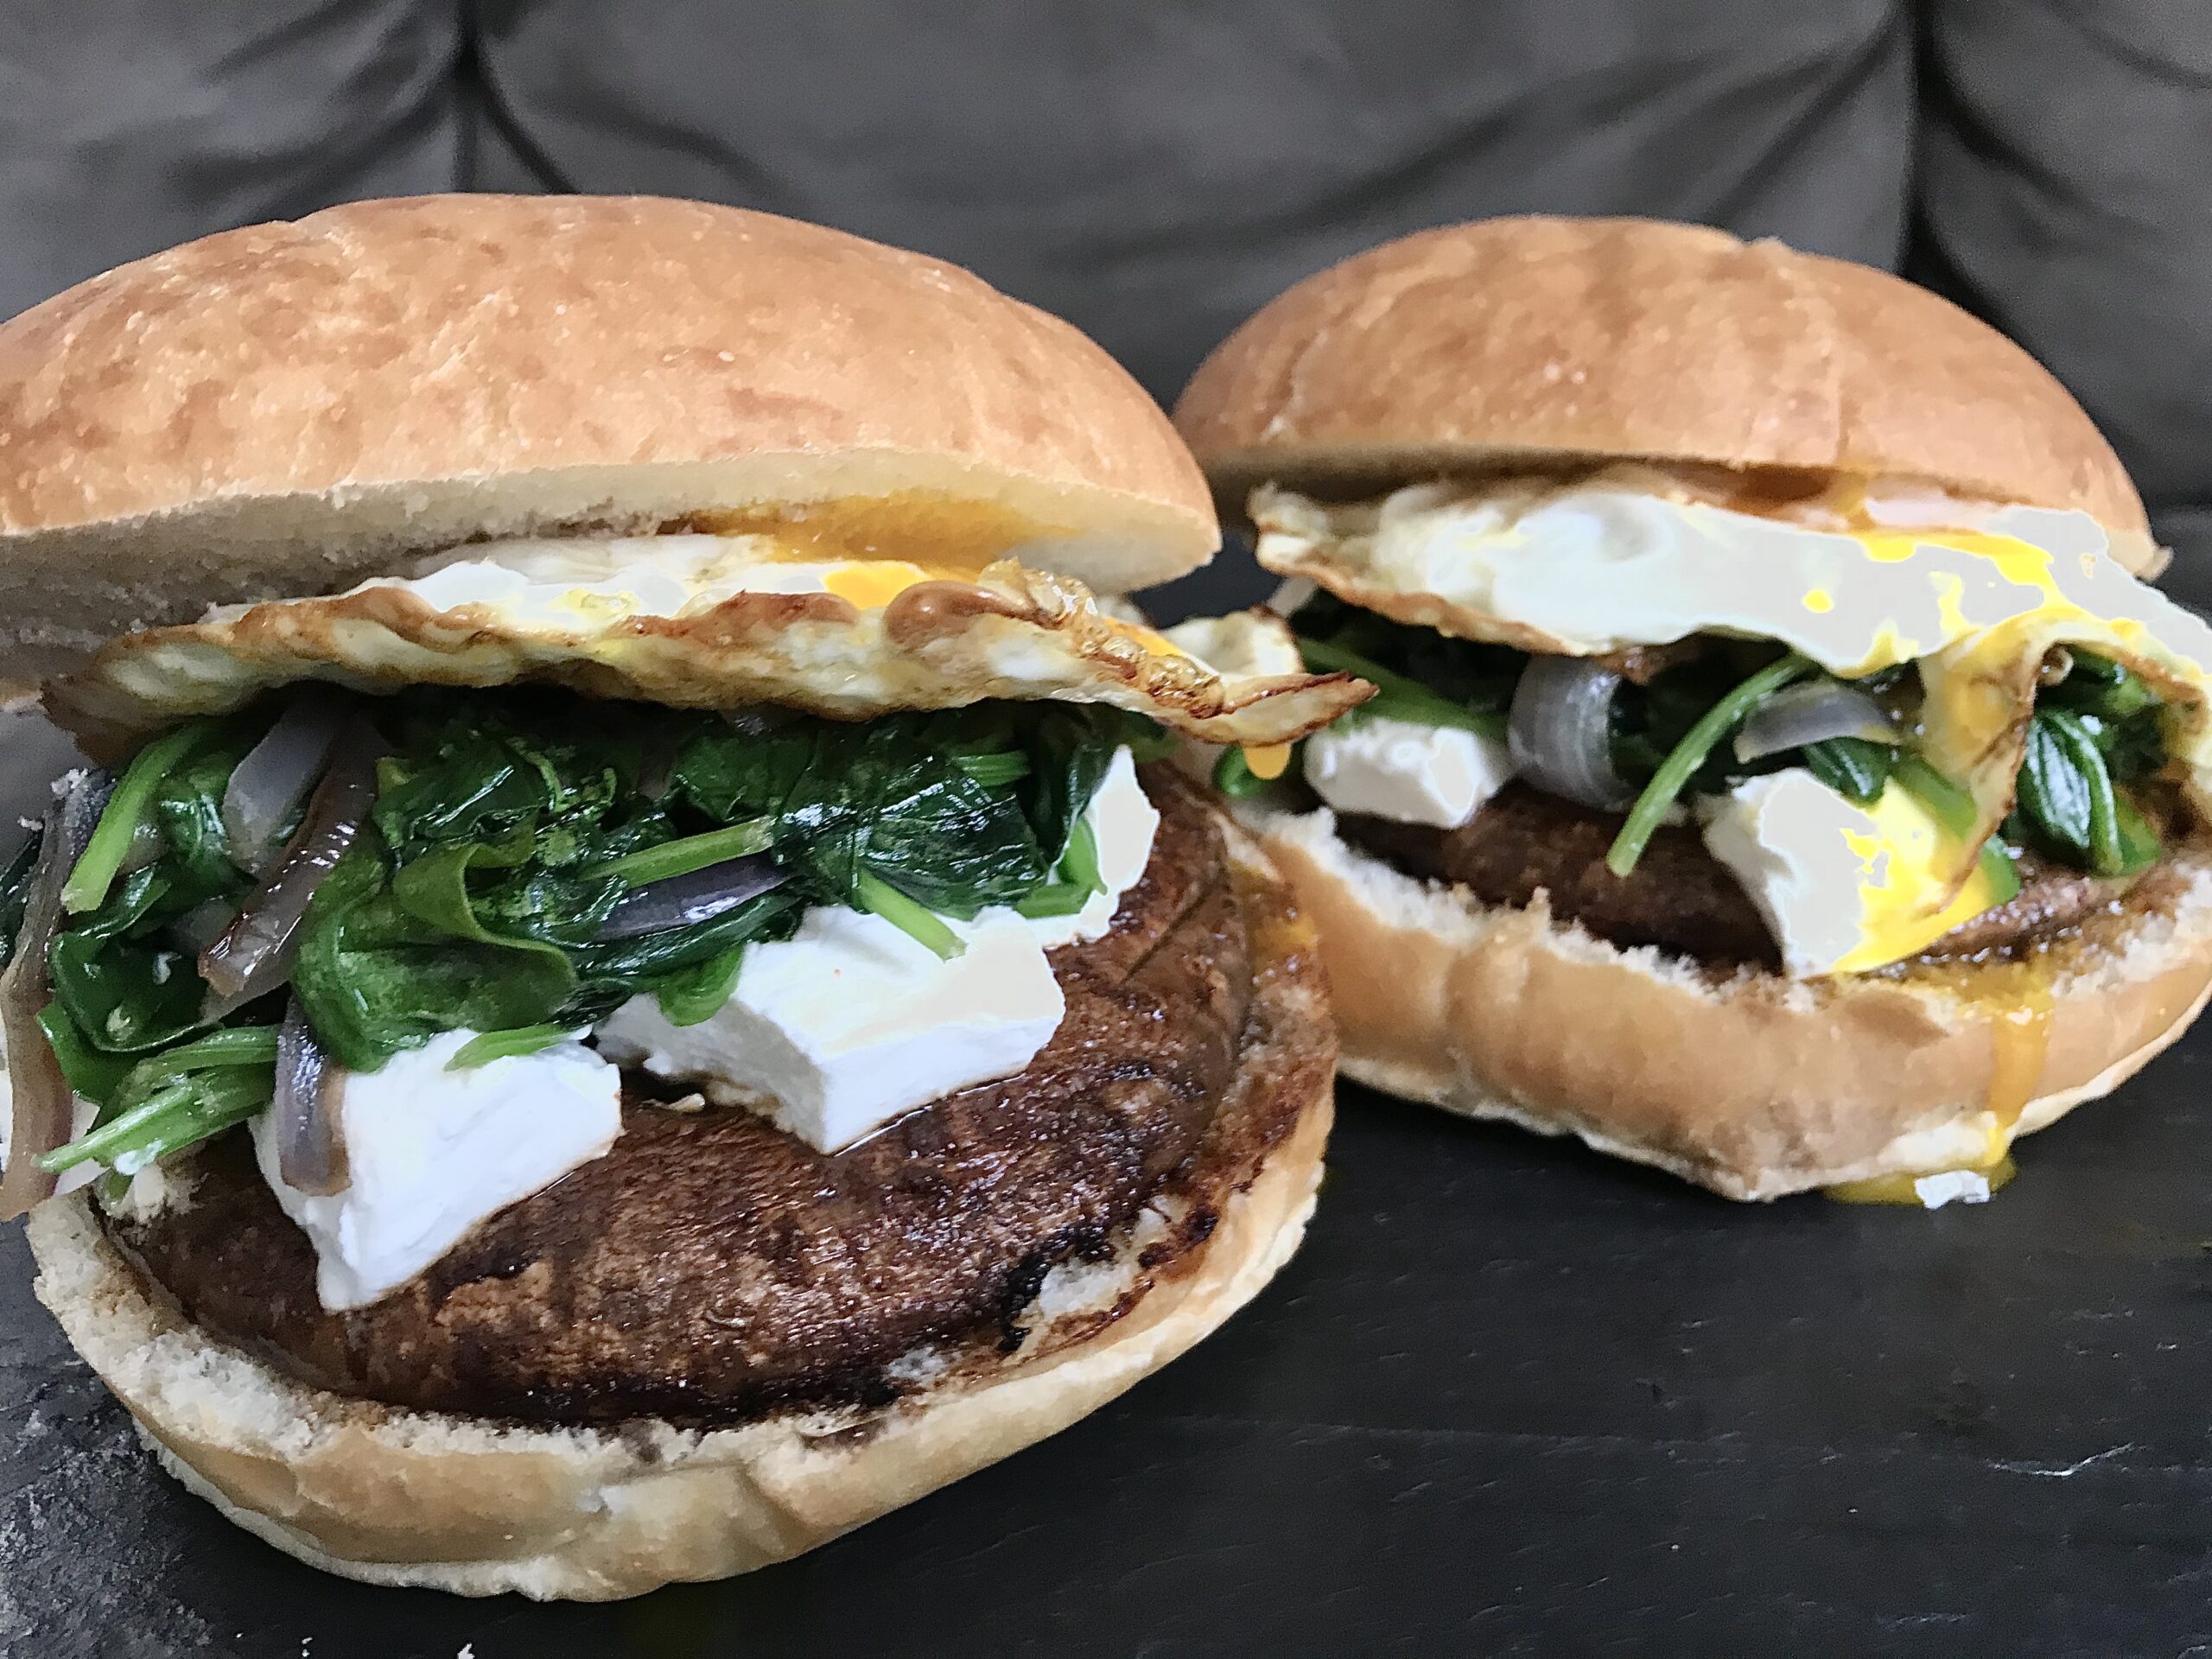 Marinated Portobello Mushroom Burger with Fried Egg, Goat Cheese, Spinach, & Caramelized Red Onion